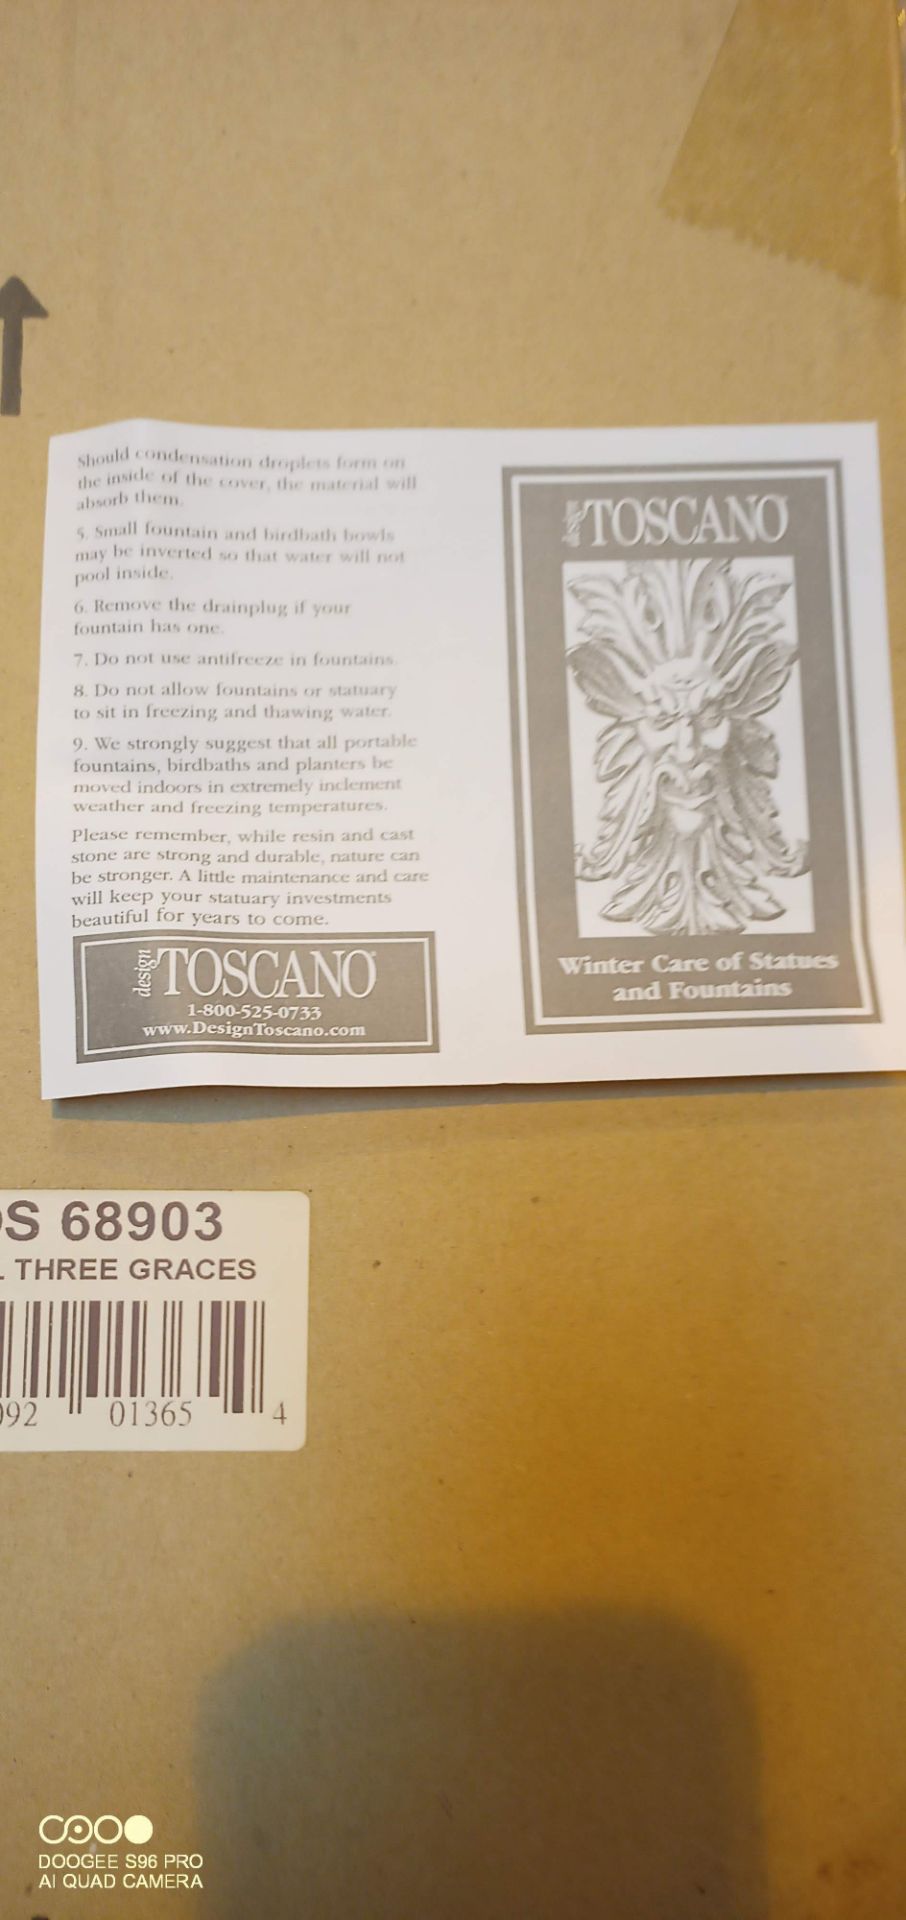 10 x Toscano Statue Wall Art Plaques | Total RRP £39.99 - Image 3 of 3